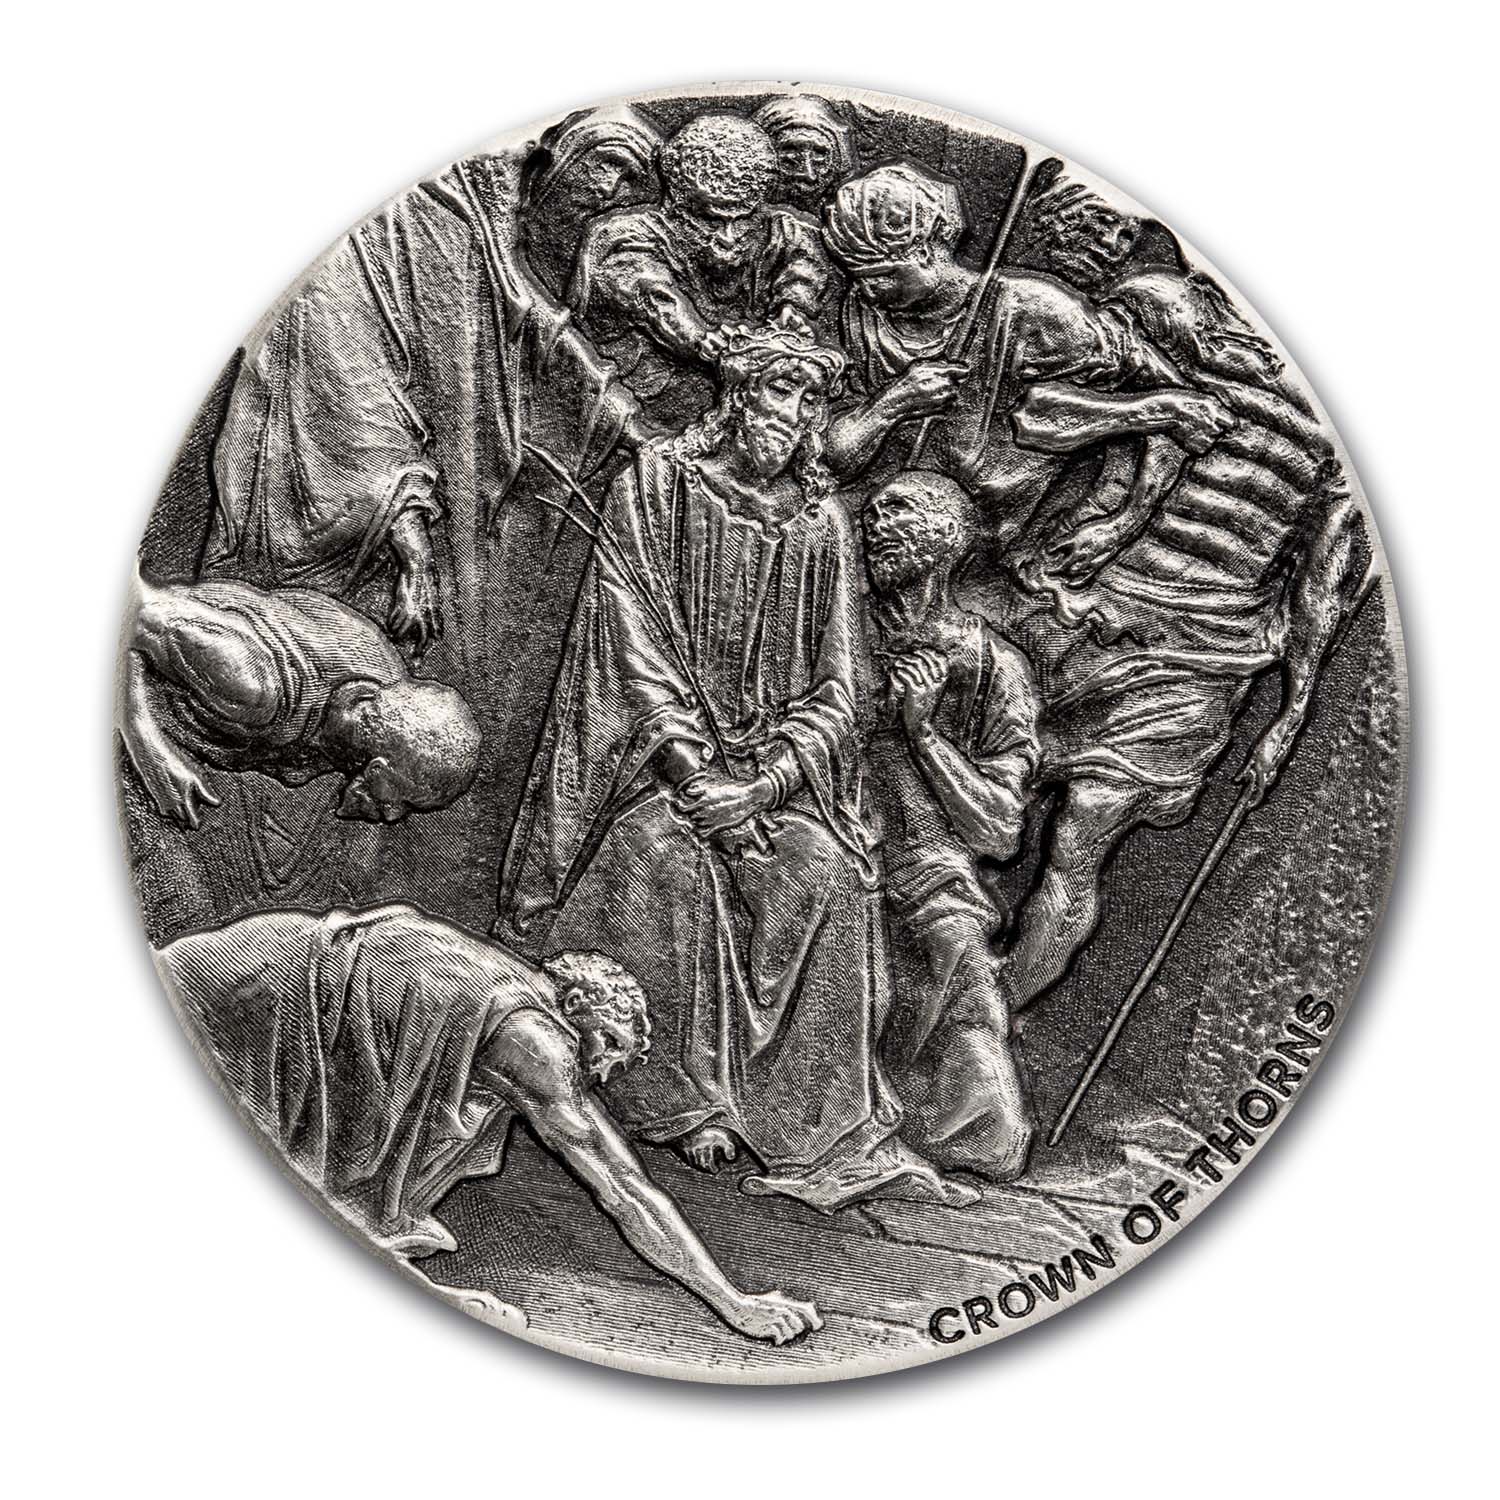 Buy 2019 2 oz Silver Coin - Biblical Series (Crown of Thorns) - Click Image to Close